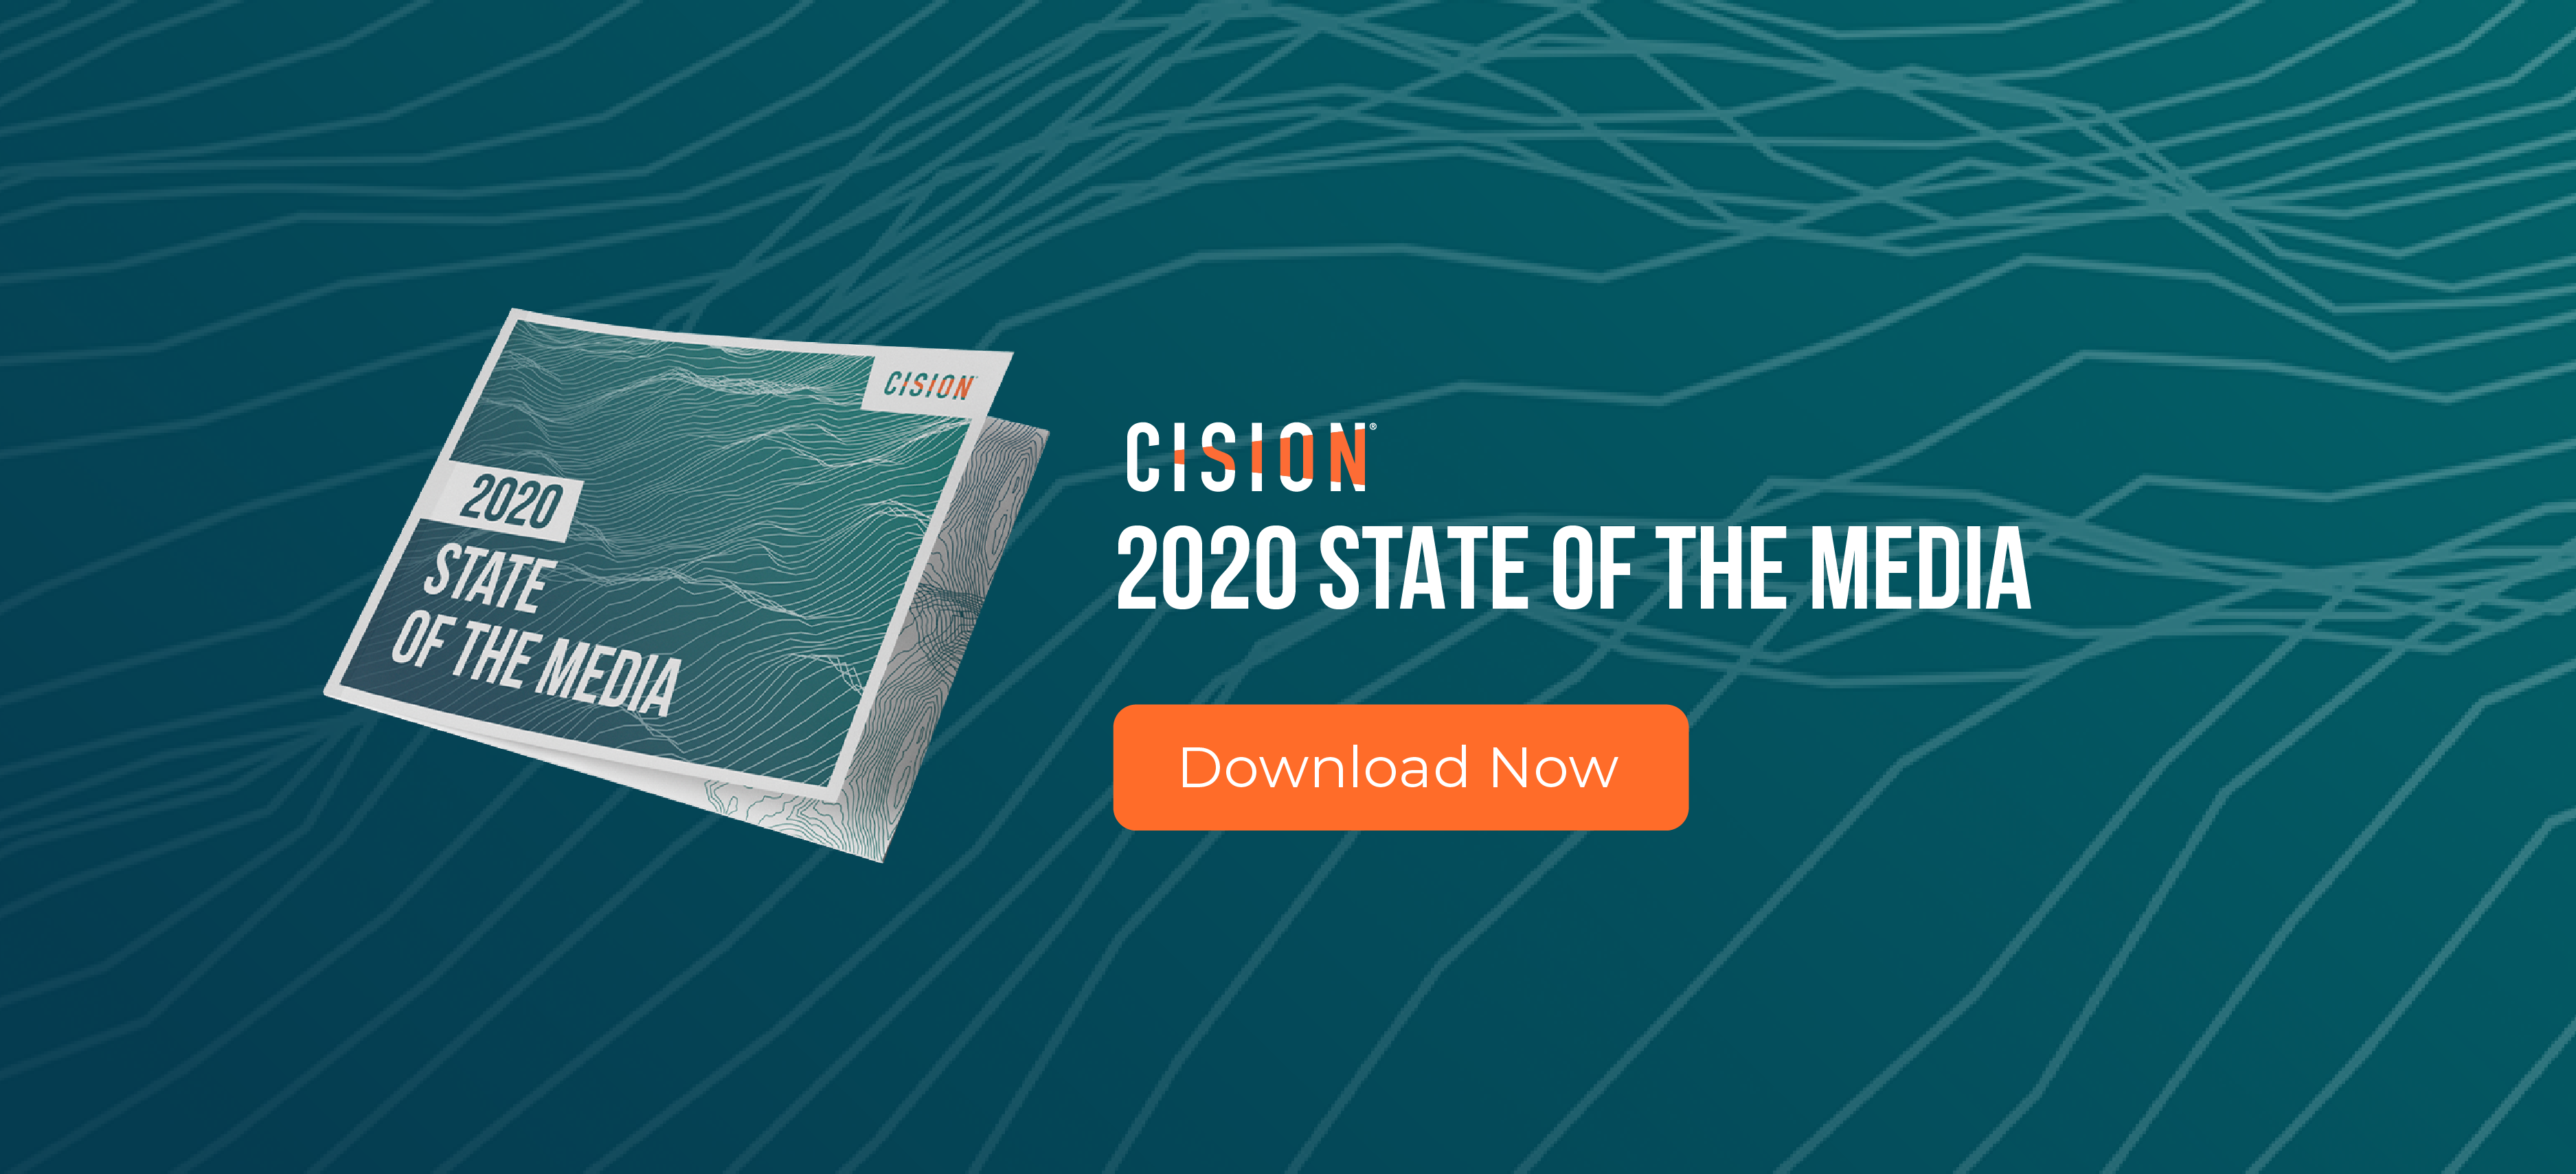 Cision 2020 State of the Media Report 